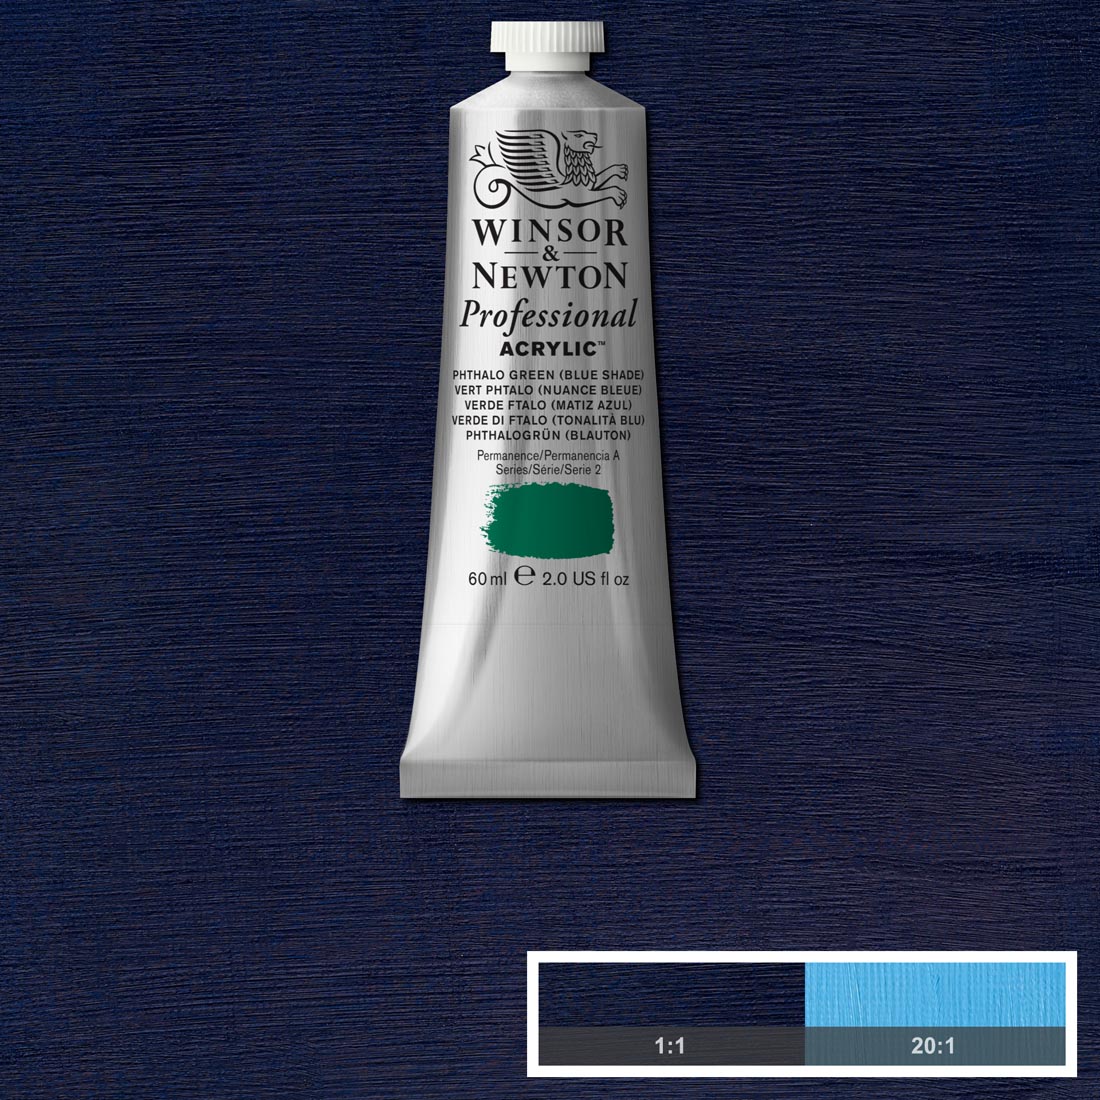 Tube of Phthalo Blue (Green Shade) Winsor and Newton Professional Acrylic with paint swatch in the background